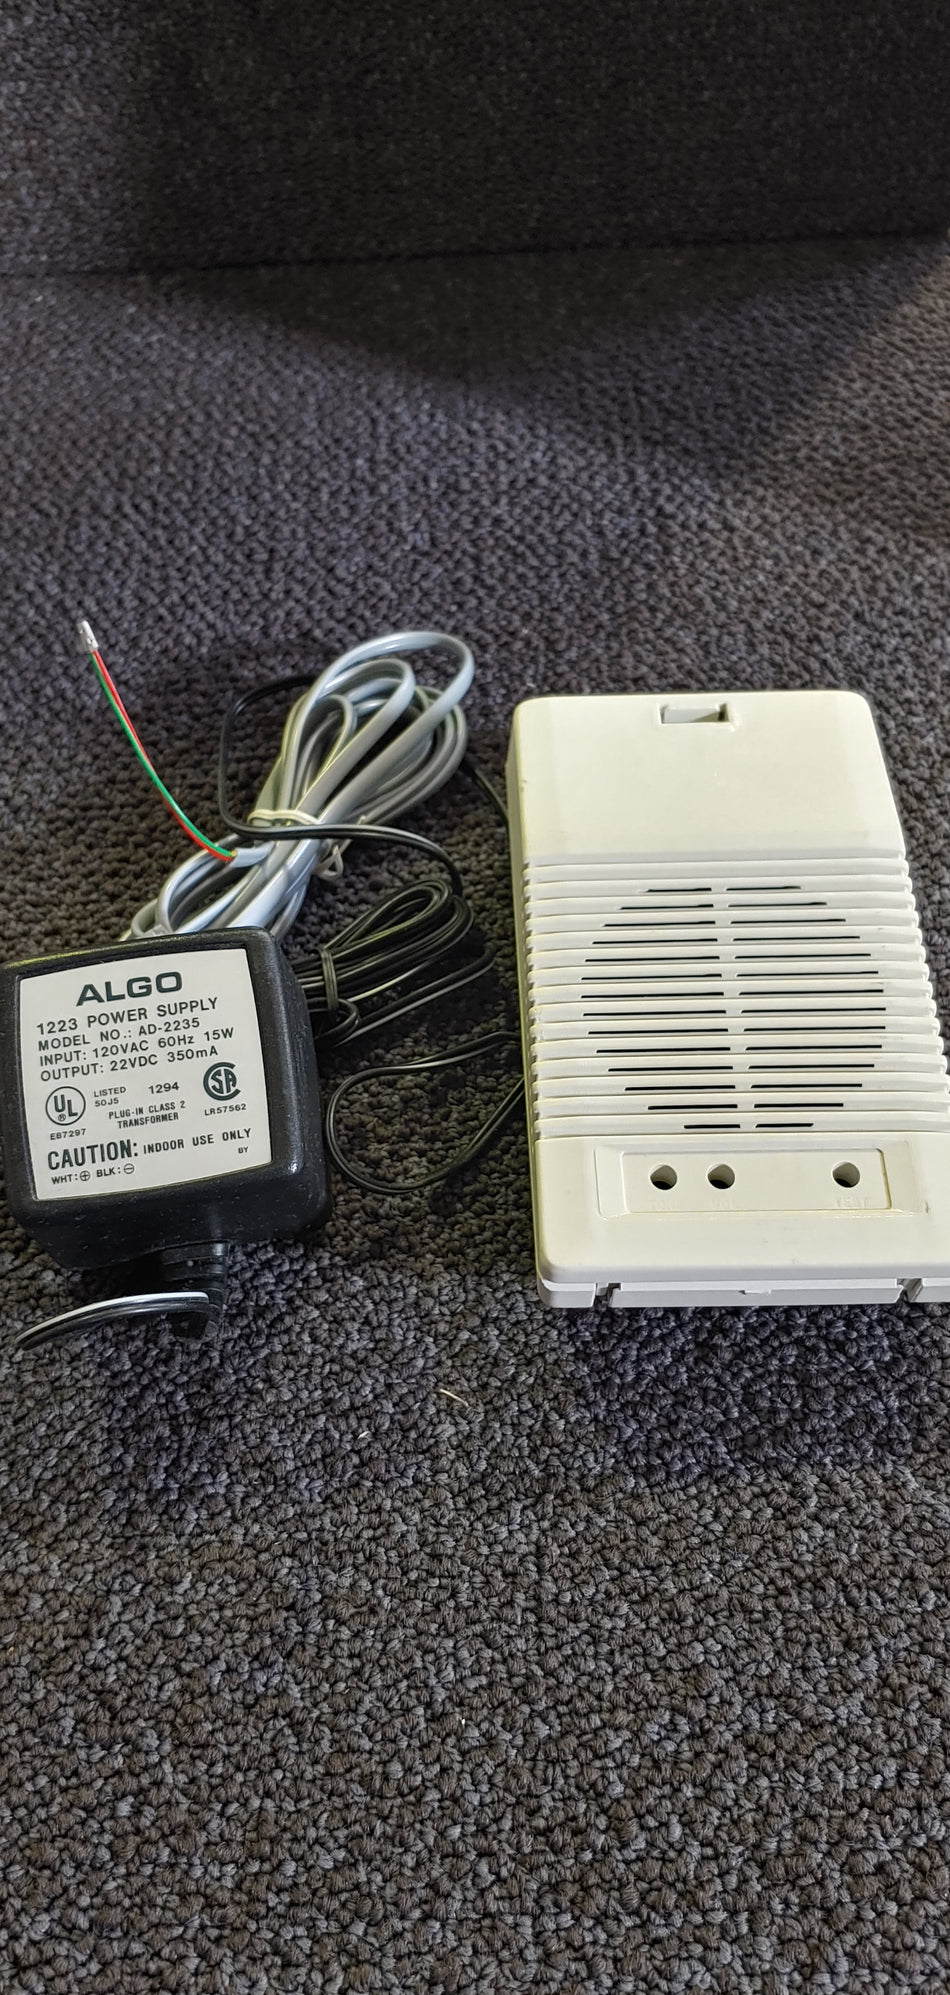 Algo Duet Plus 1825 Loud Phone Ringer with Power Supply 120vac - 22vdc (used)